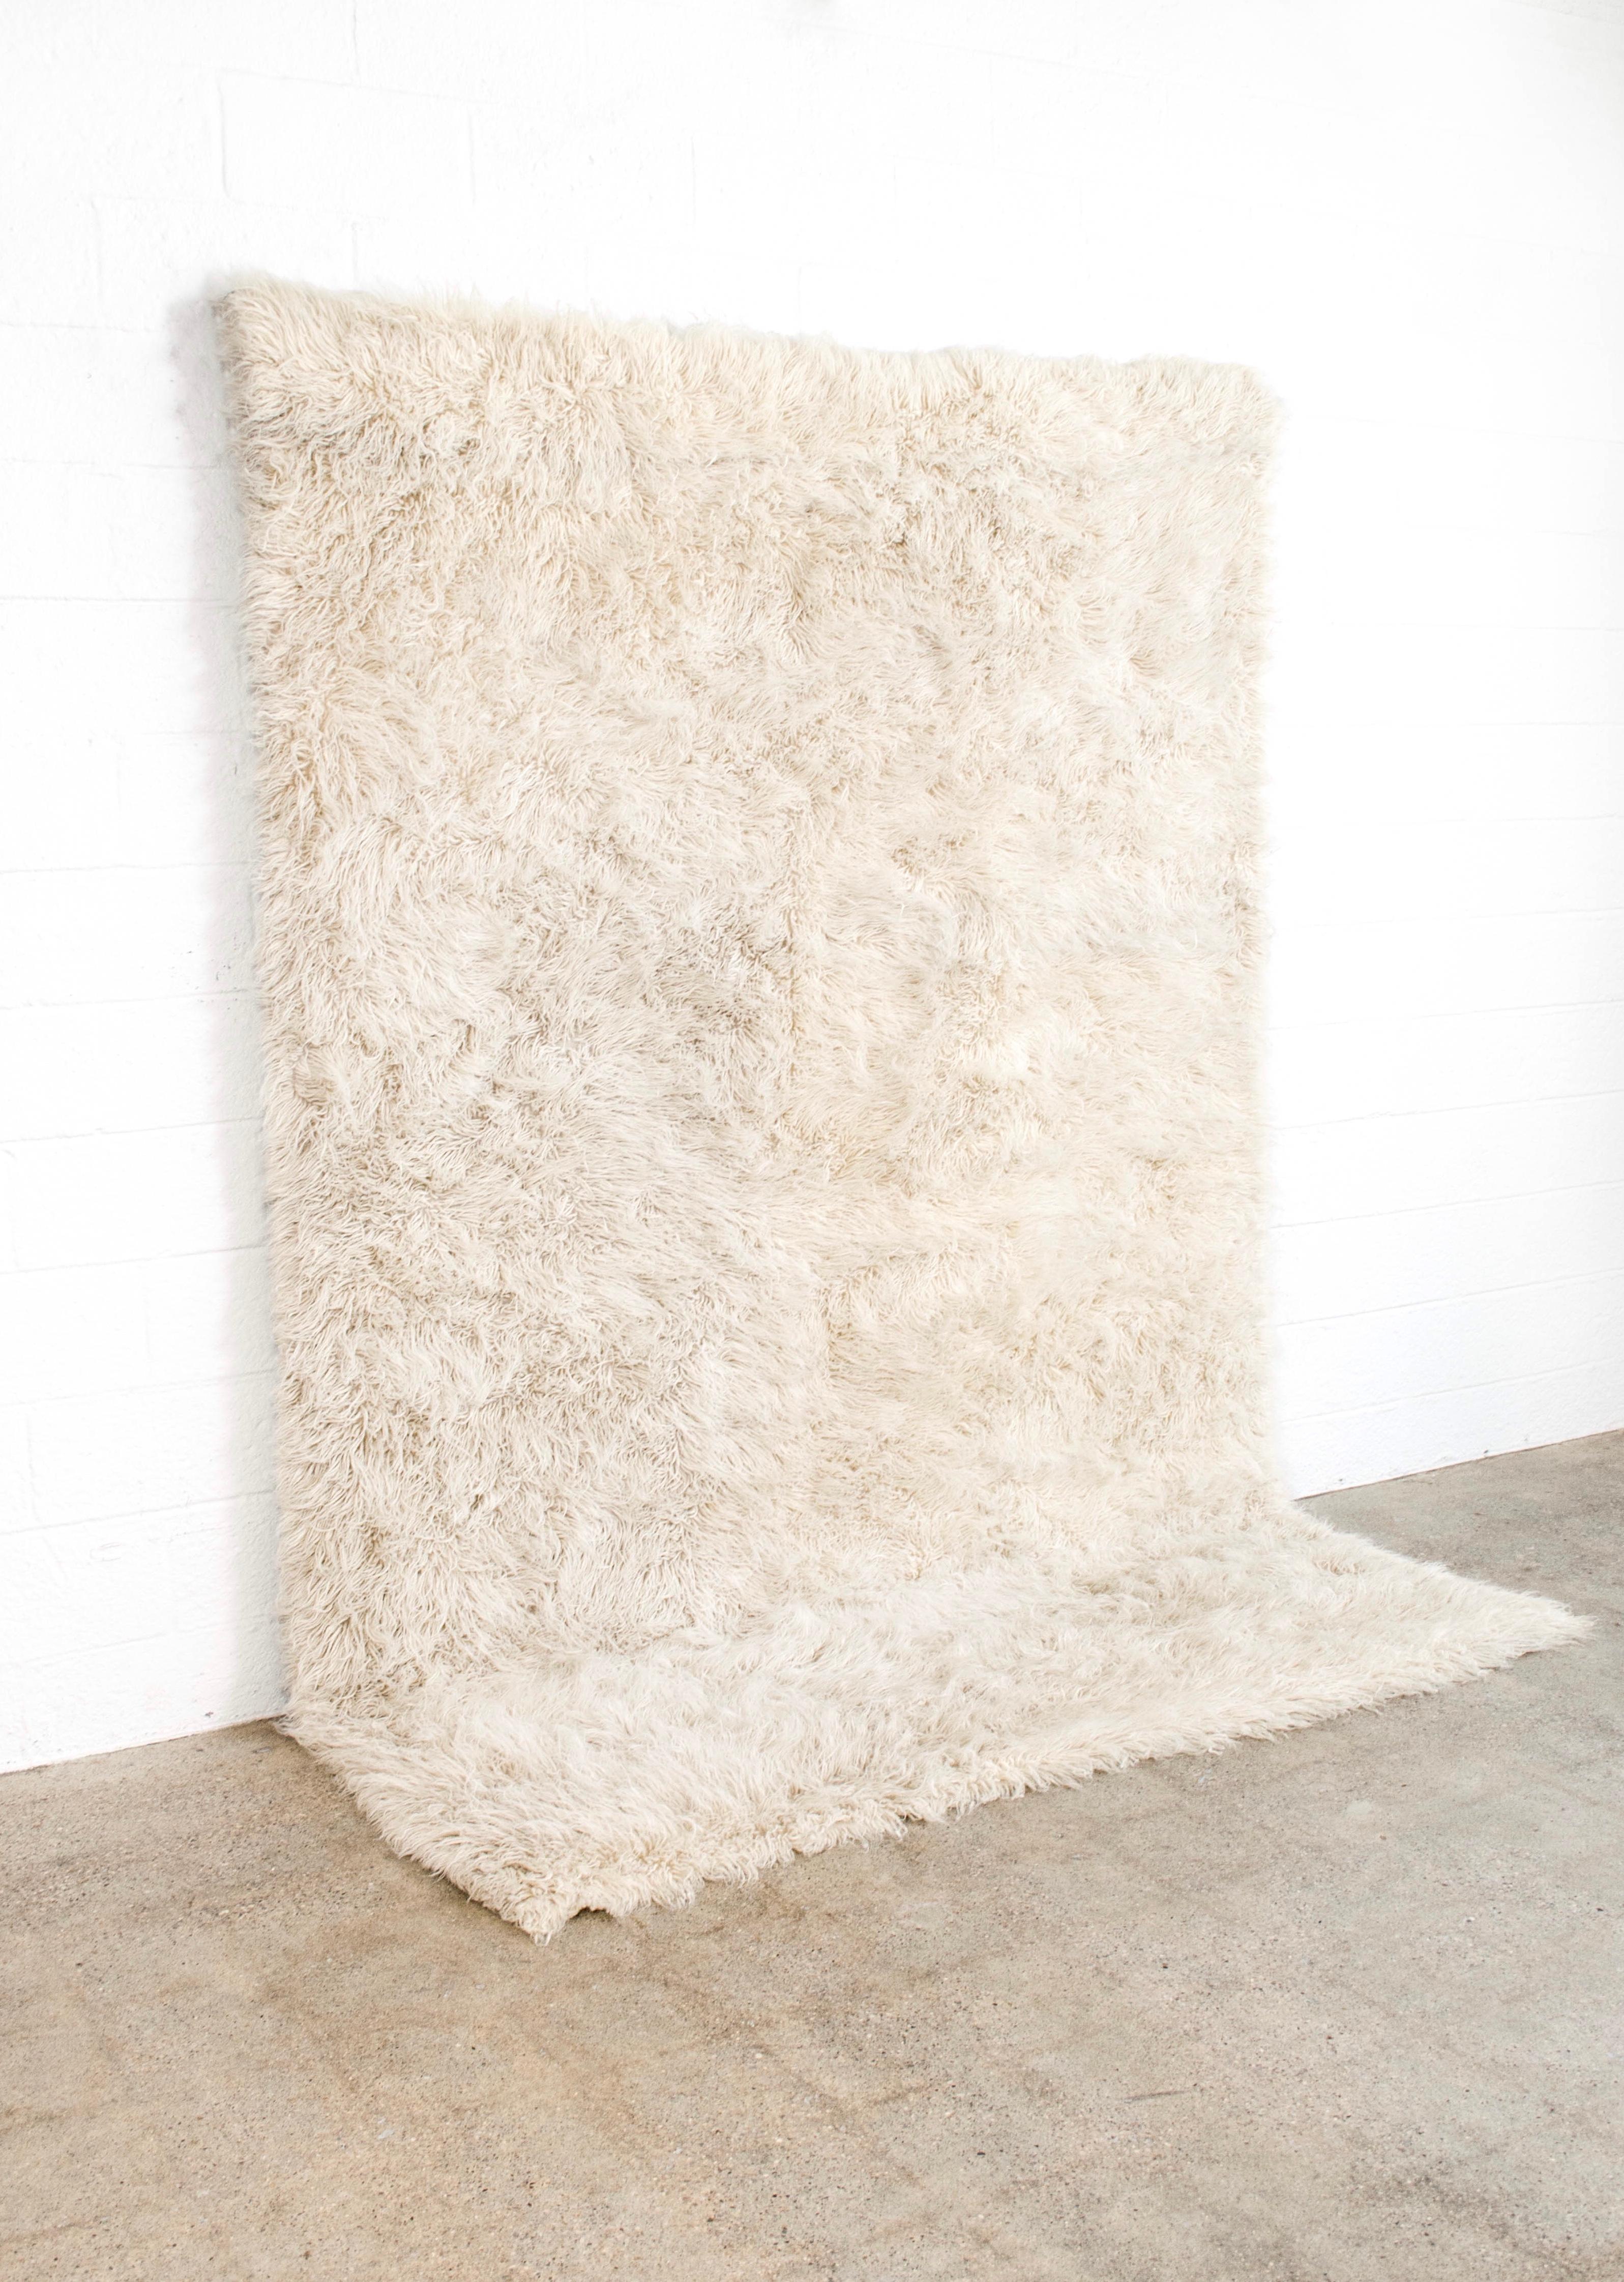 This beautiful large vintage Rya wool shag rug was made in Sweden, circa 1960. Handwoven from 100% un-dyed wool, the rug has a soft and luxurious thick shaggy pile. The clean, minimalist design of this natural ivory carpet makes it the perfect